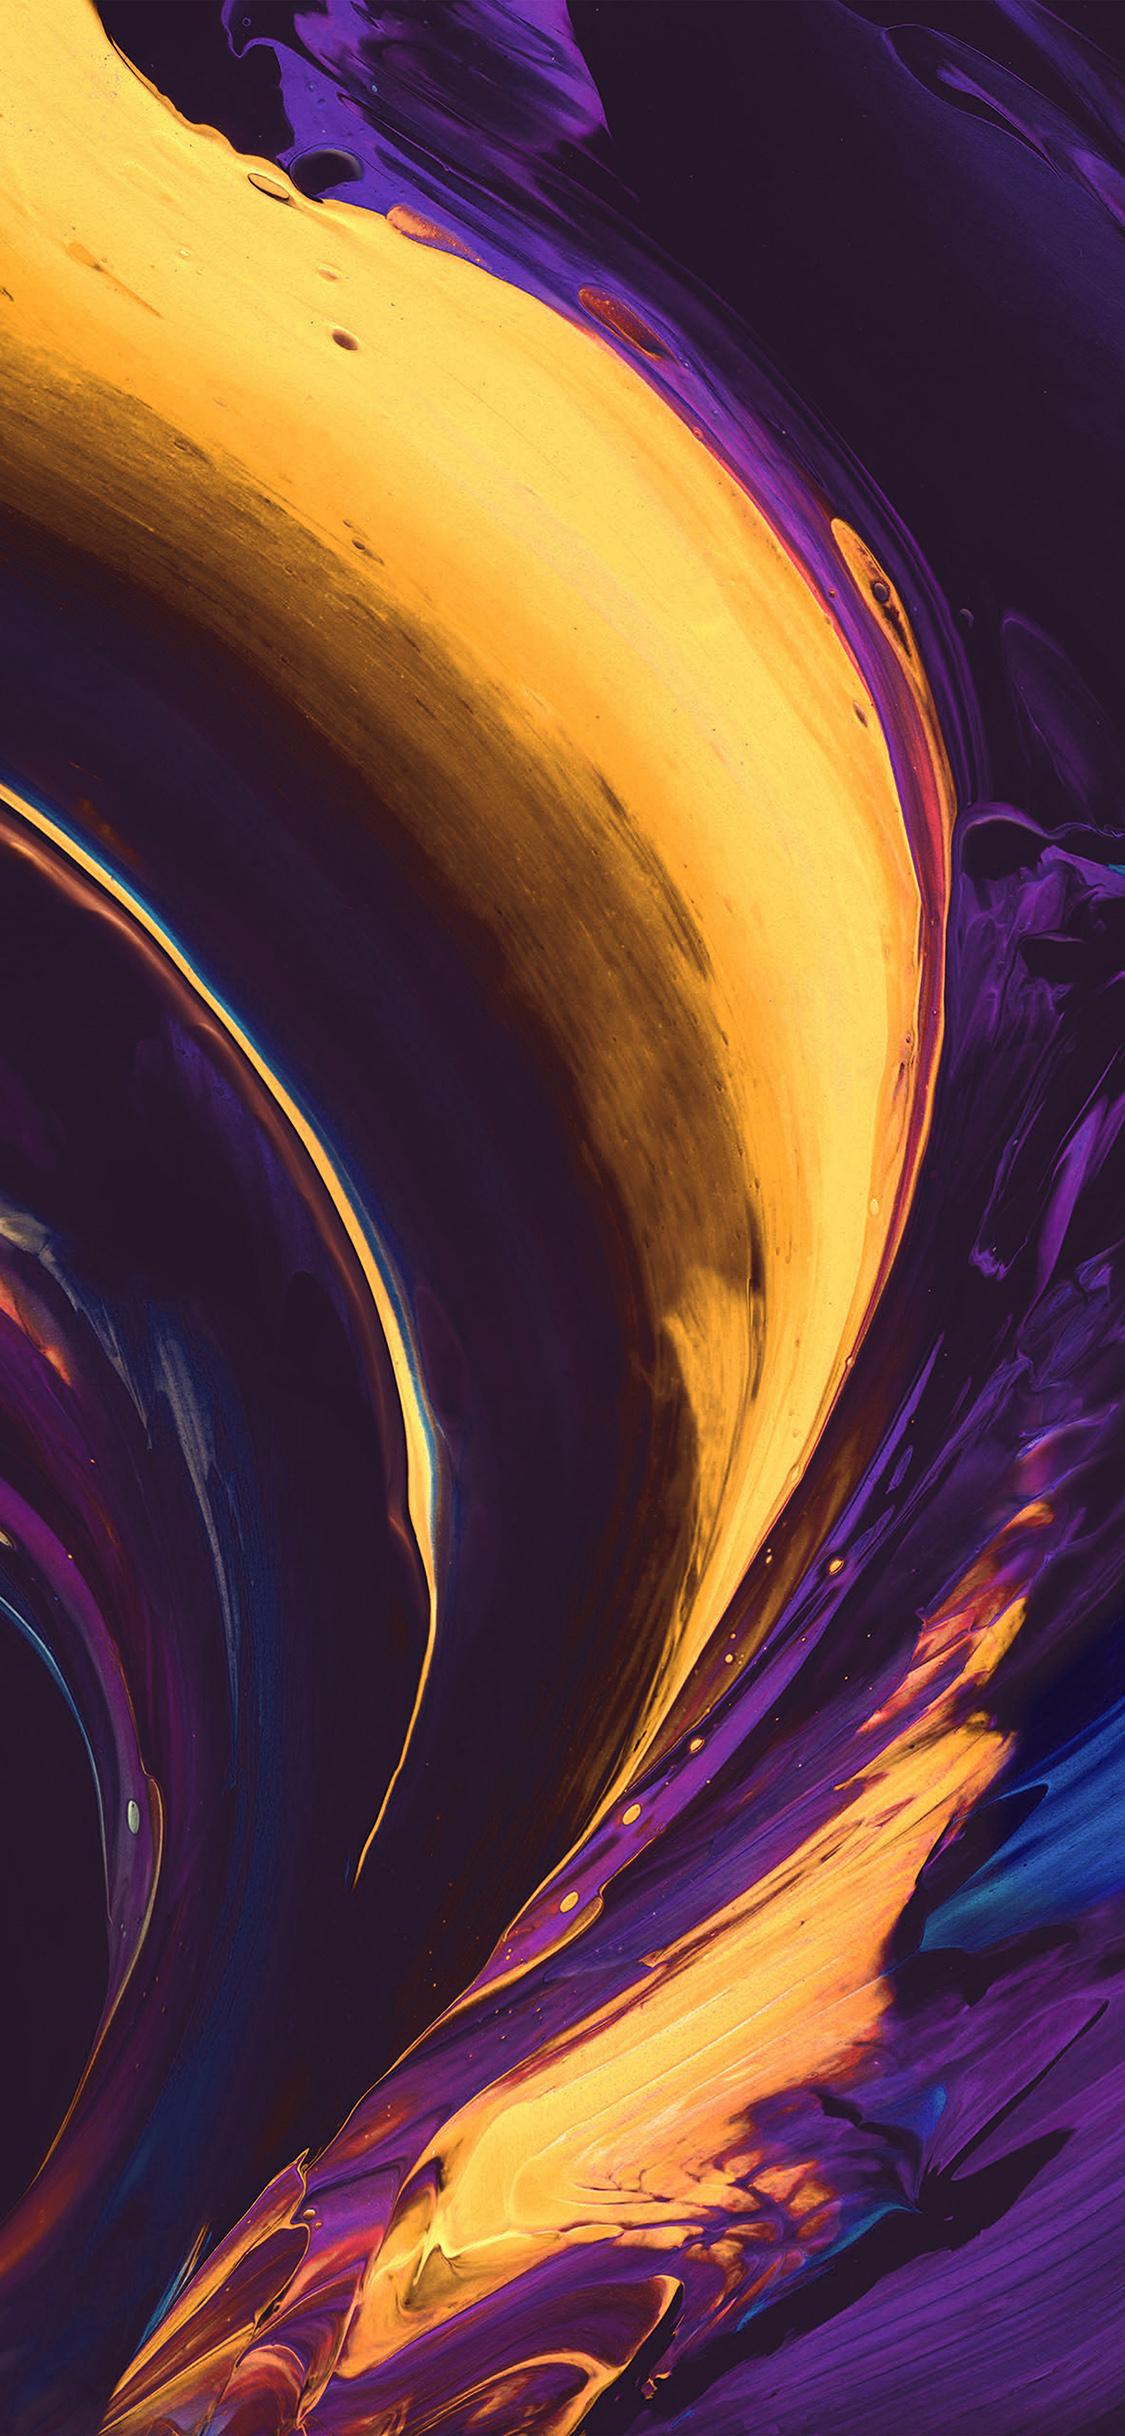 iPhone X wallpaper. htc abstract